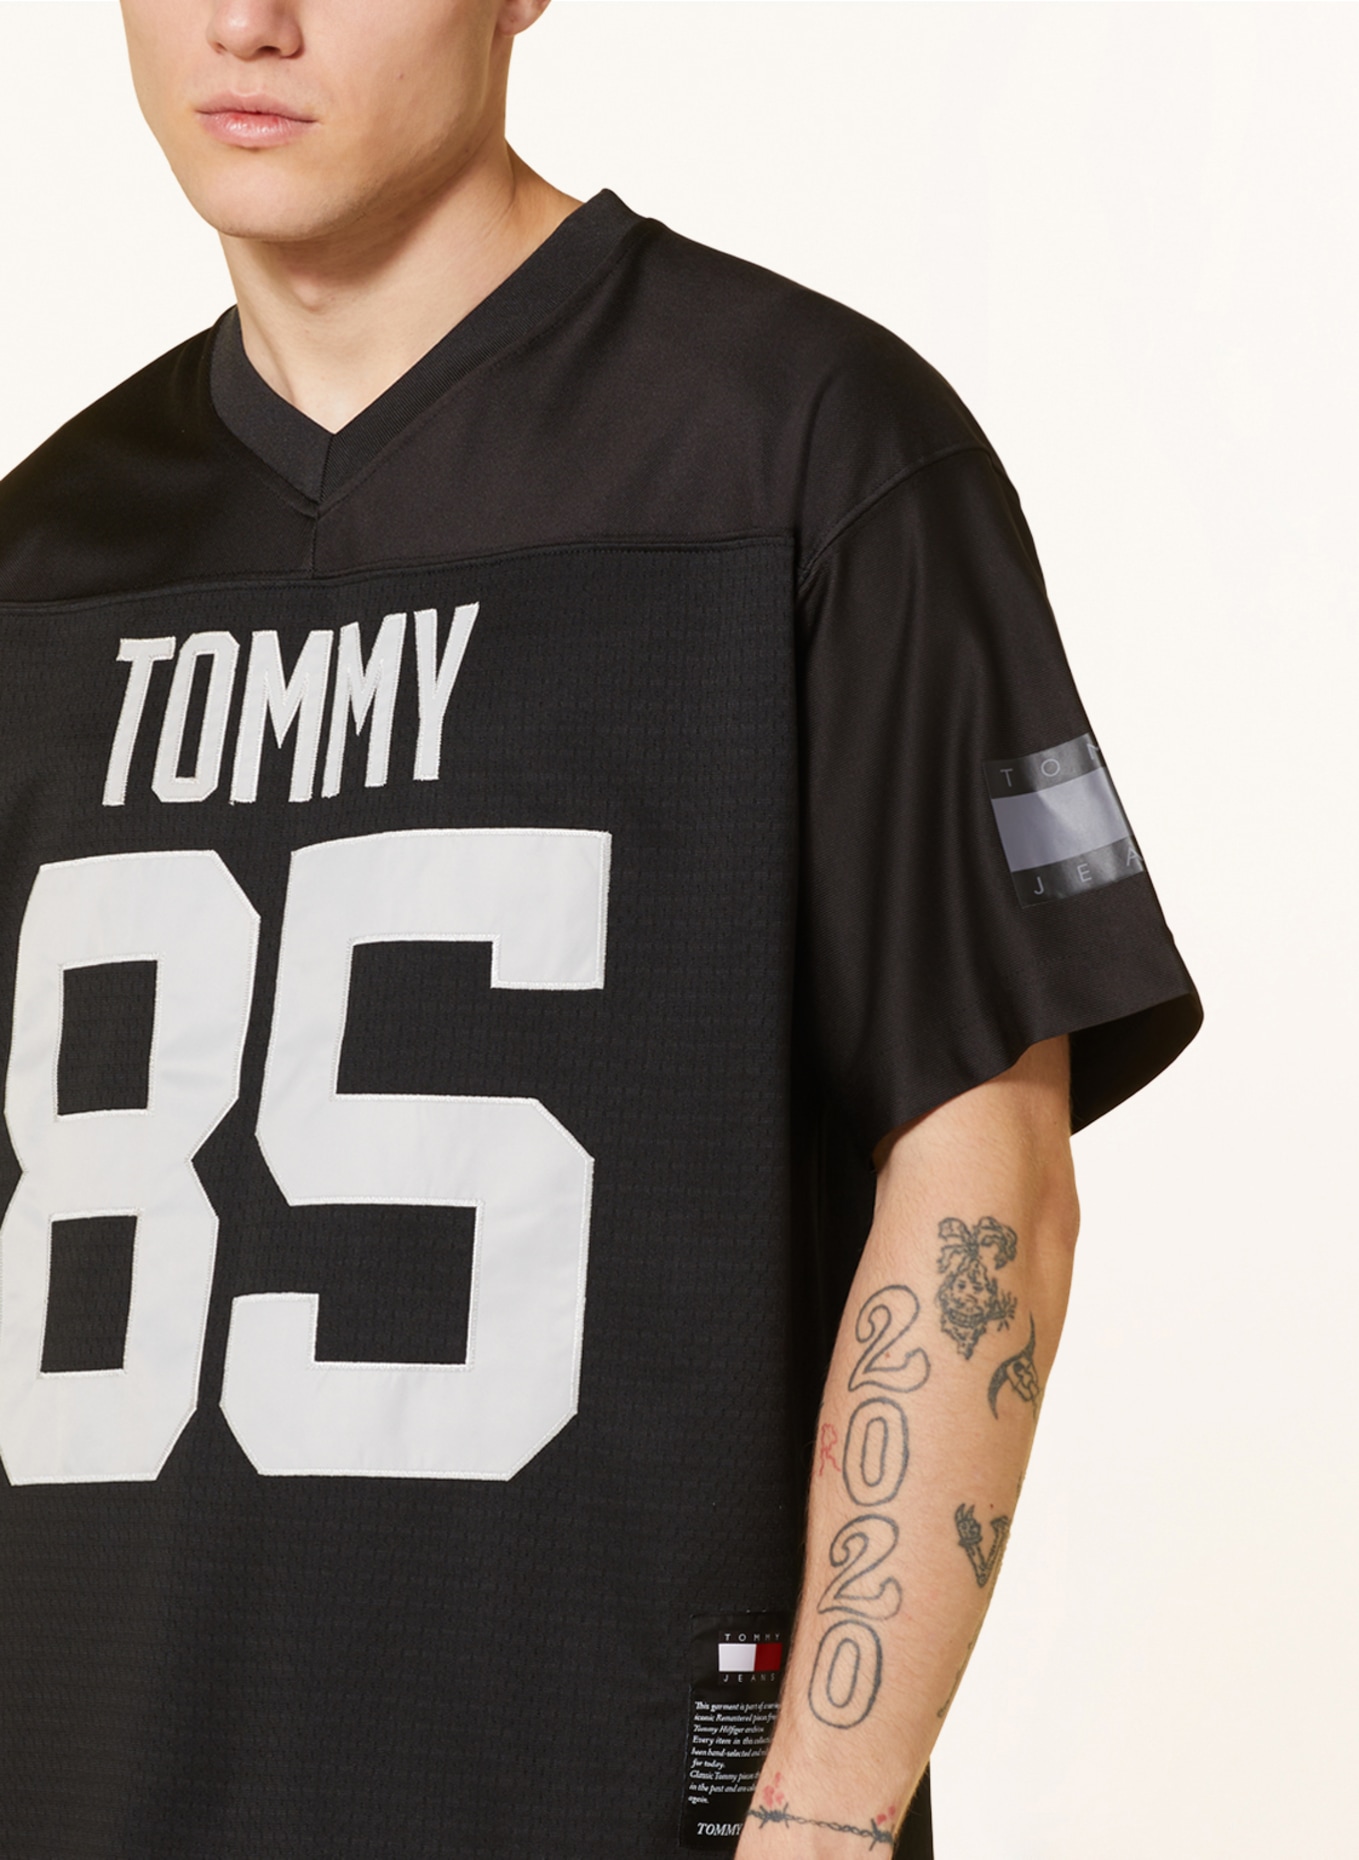 JEANS TOMMY gray of black/ T-shirt made in mesh